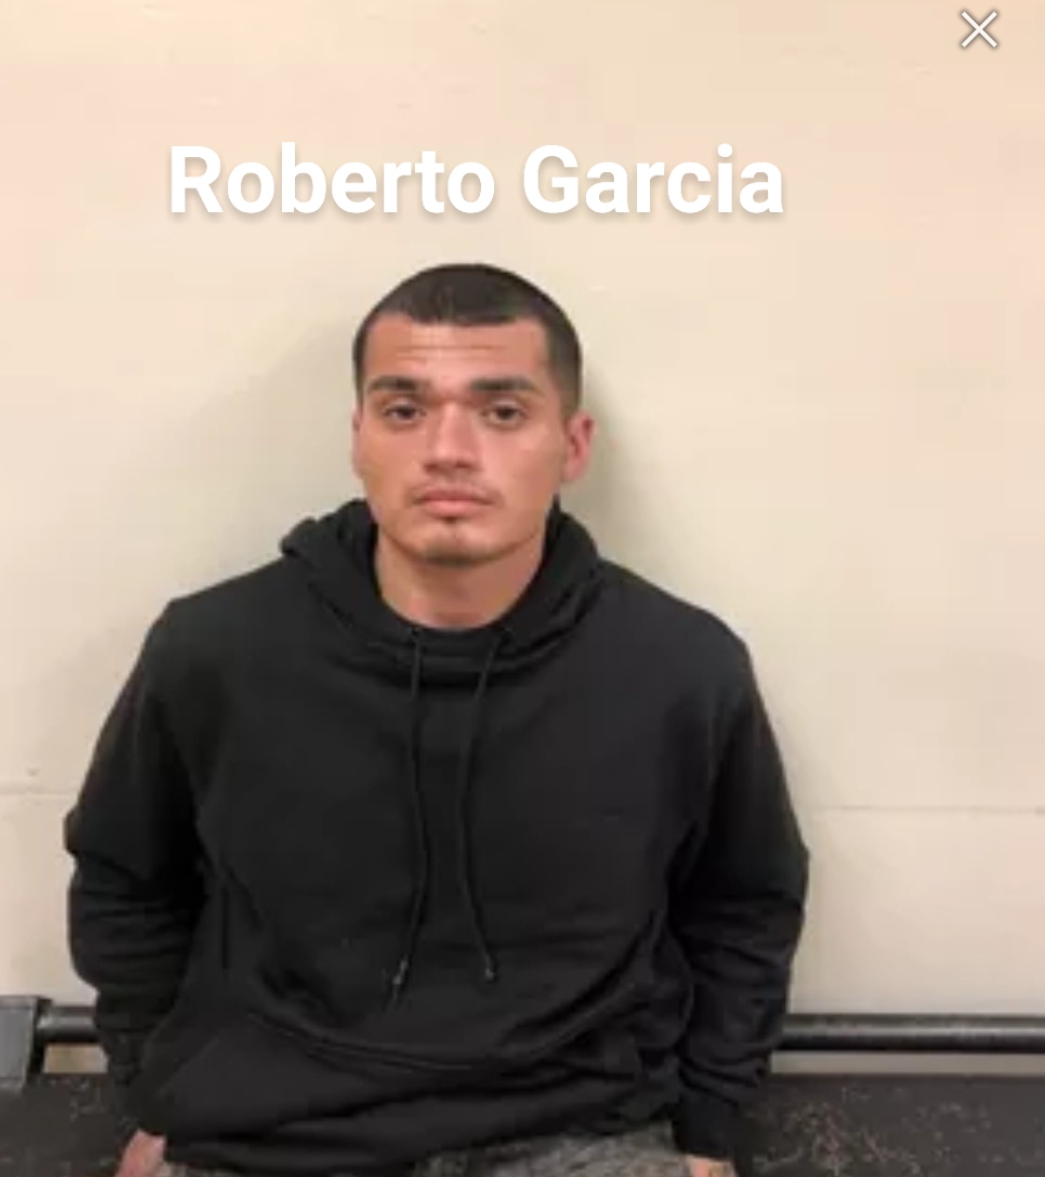 Police arrest Merced Man on weapon and Meth Charges